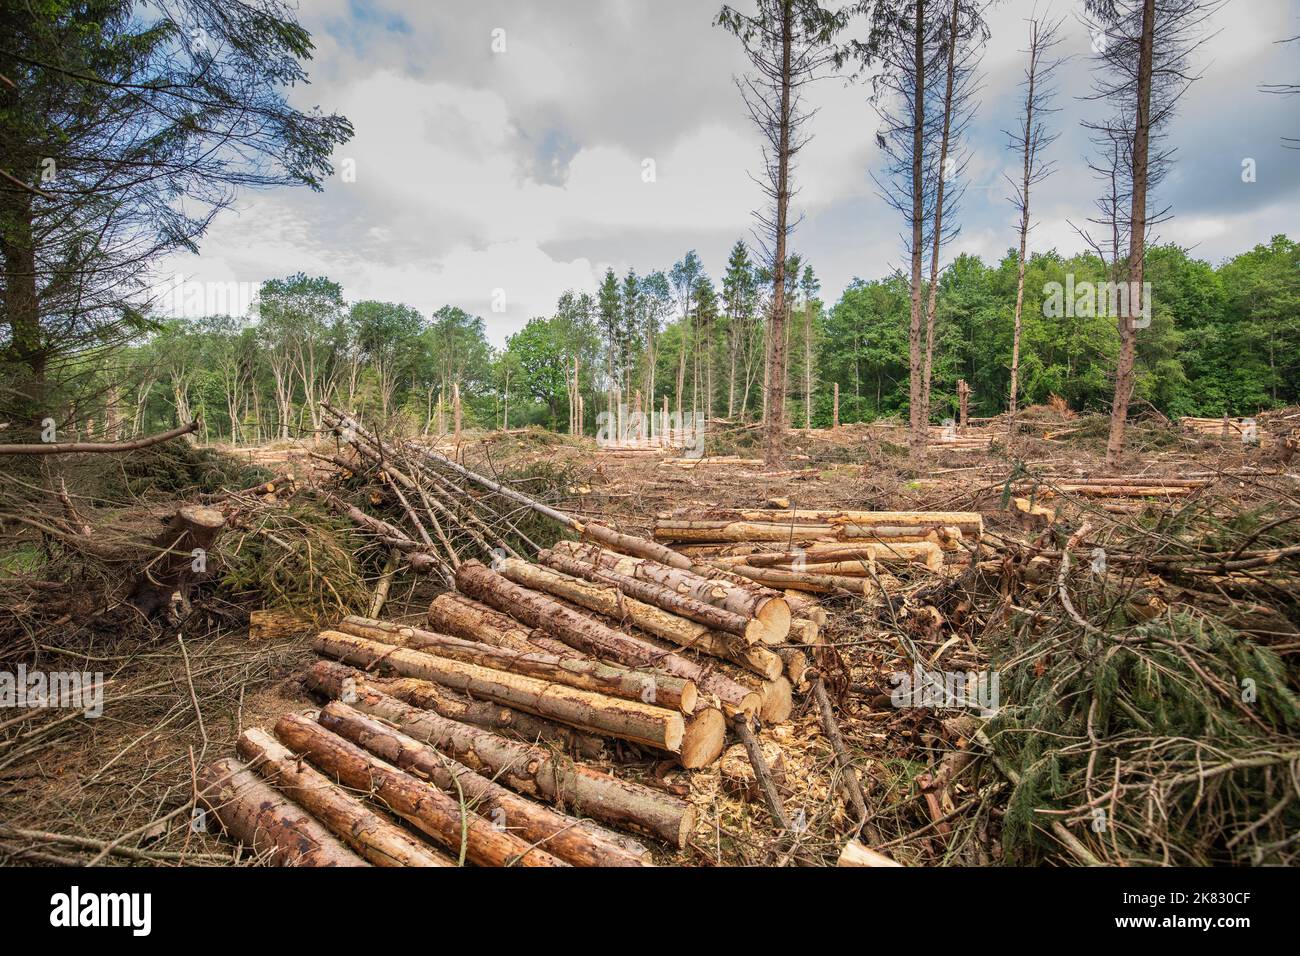 Overview of a spruce forest destroyed by winter storm Unice, causing deforestation with environmental damage on the Hoogveen estate with piled logs ne Stock Photo